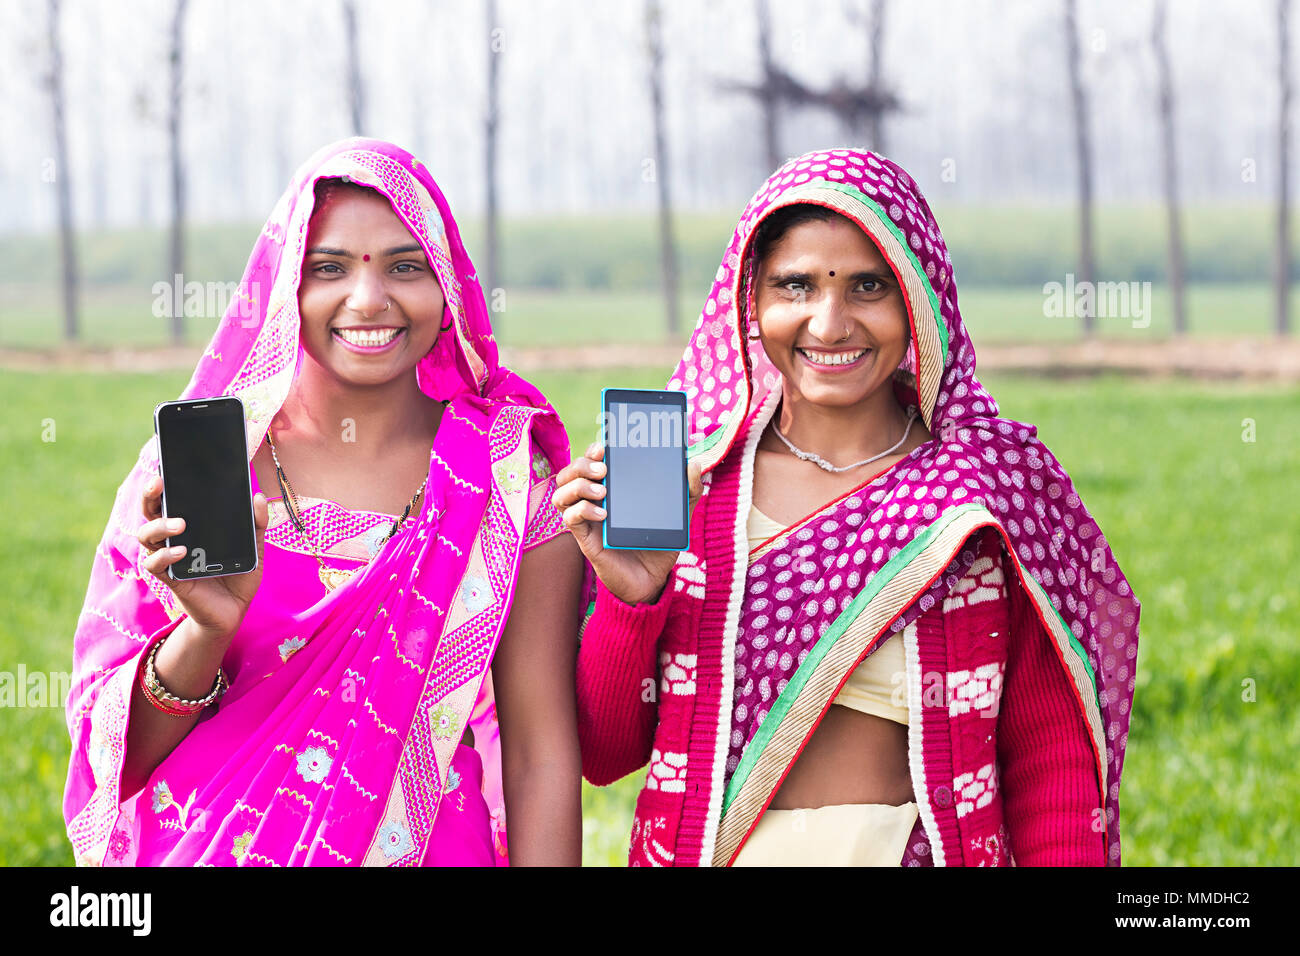 Smiling Two Rural Farmer Women Friend Showing Cell-Phone Field Village Stock Photo